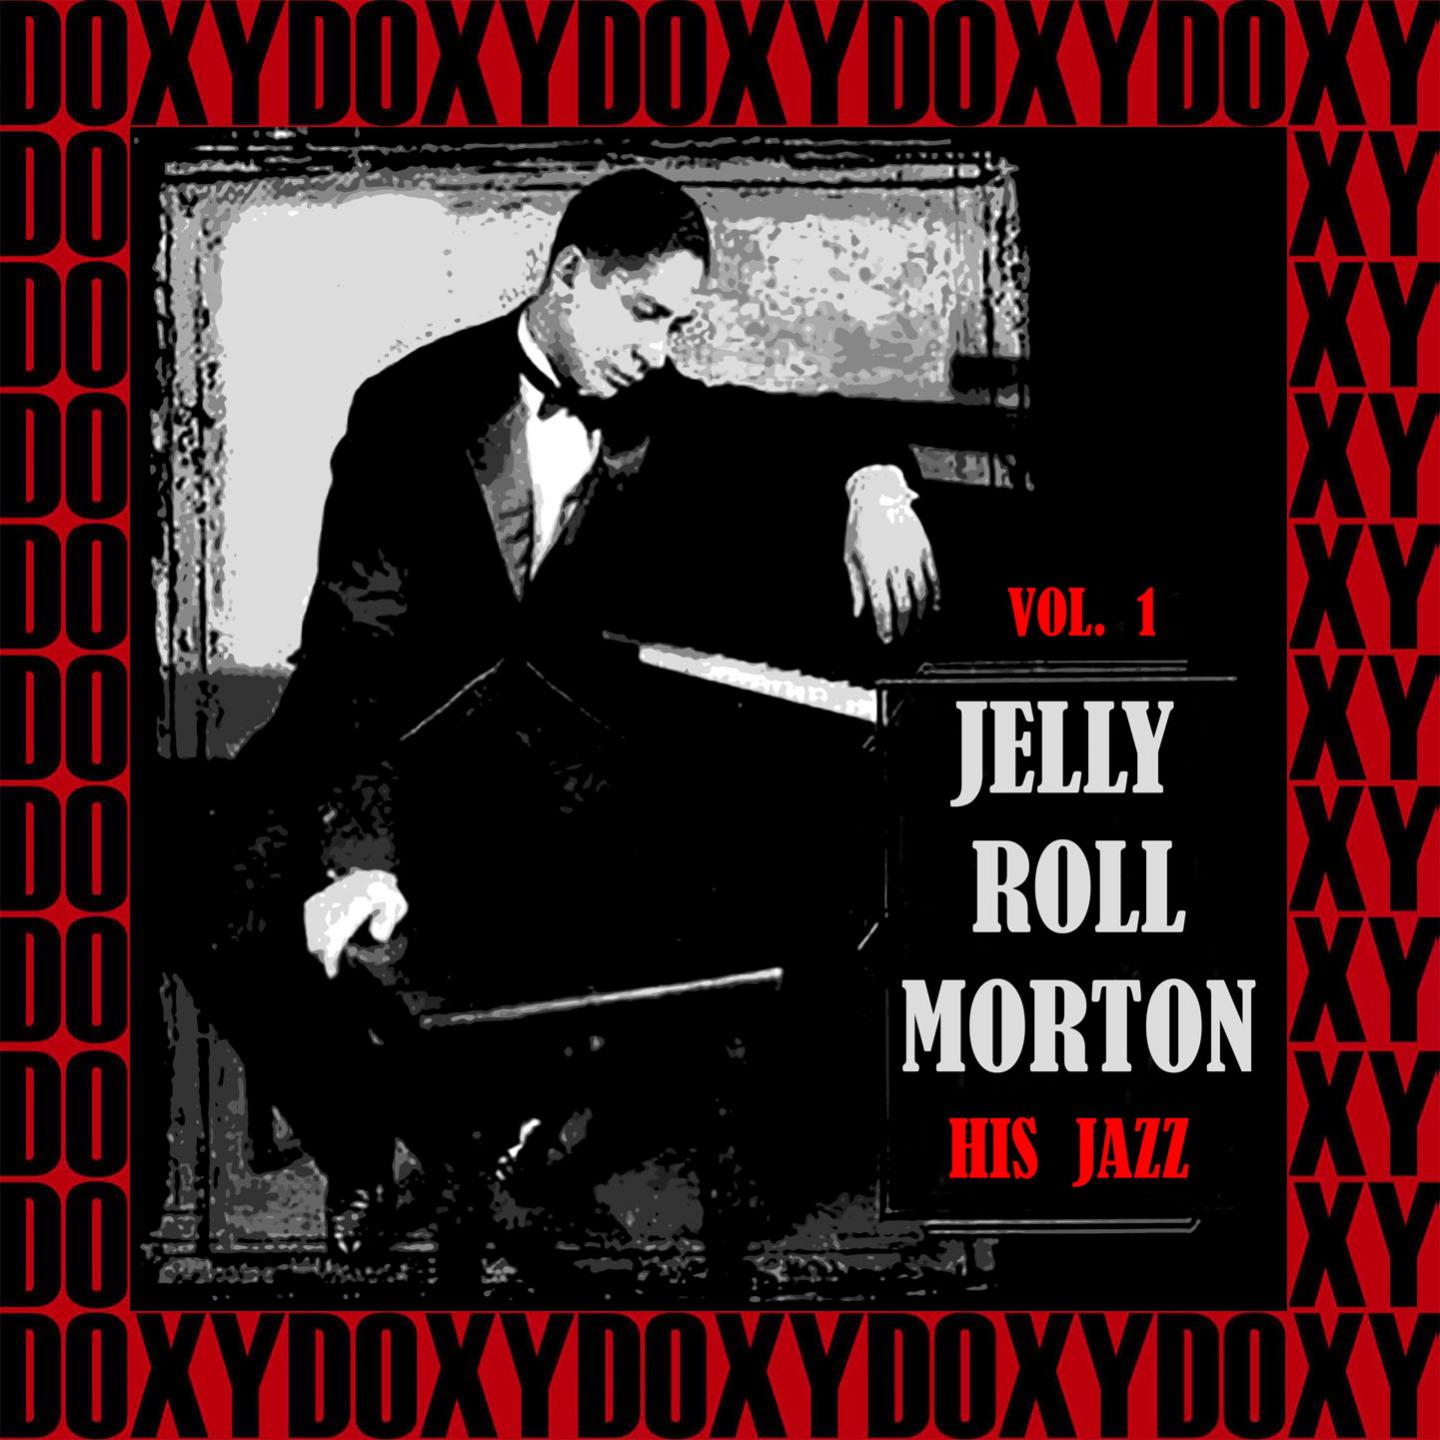 His Jazz, Vol. 1 (Hd Remastered Edition, Doxy Collection)专辑